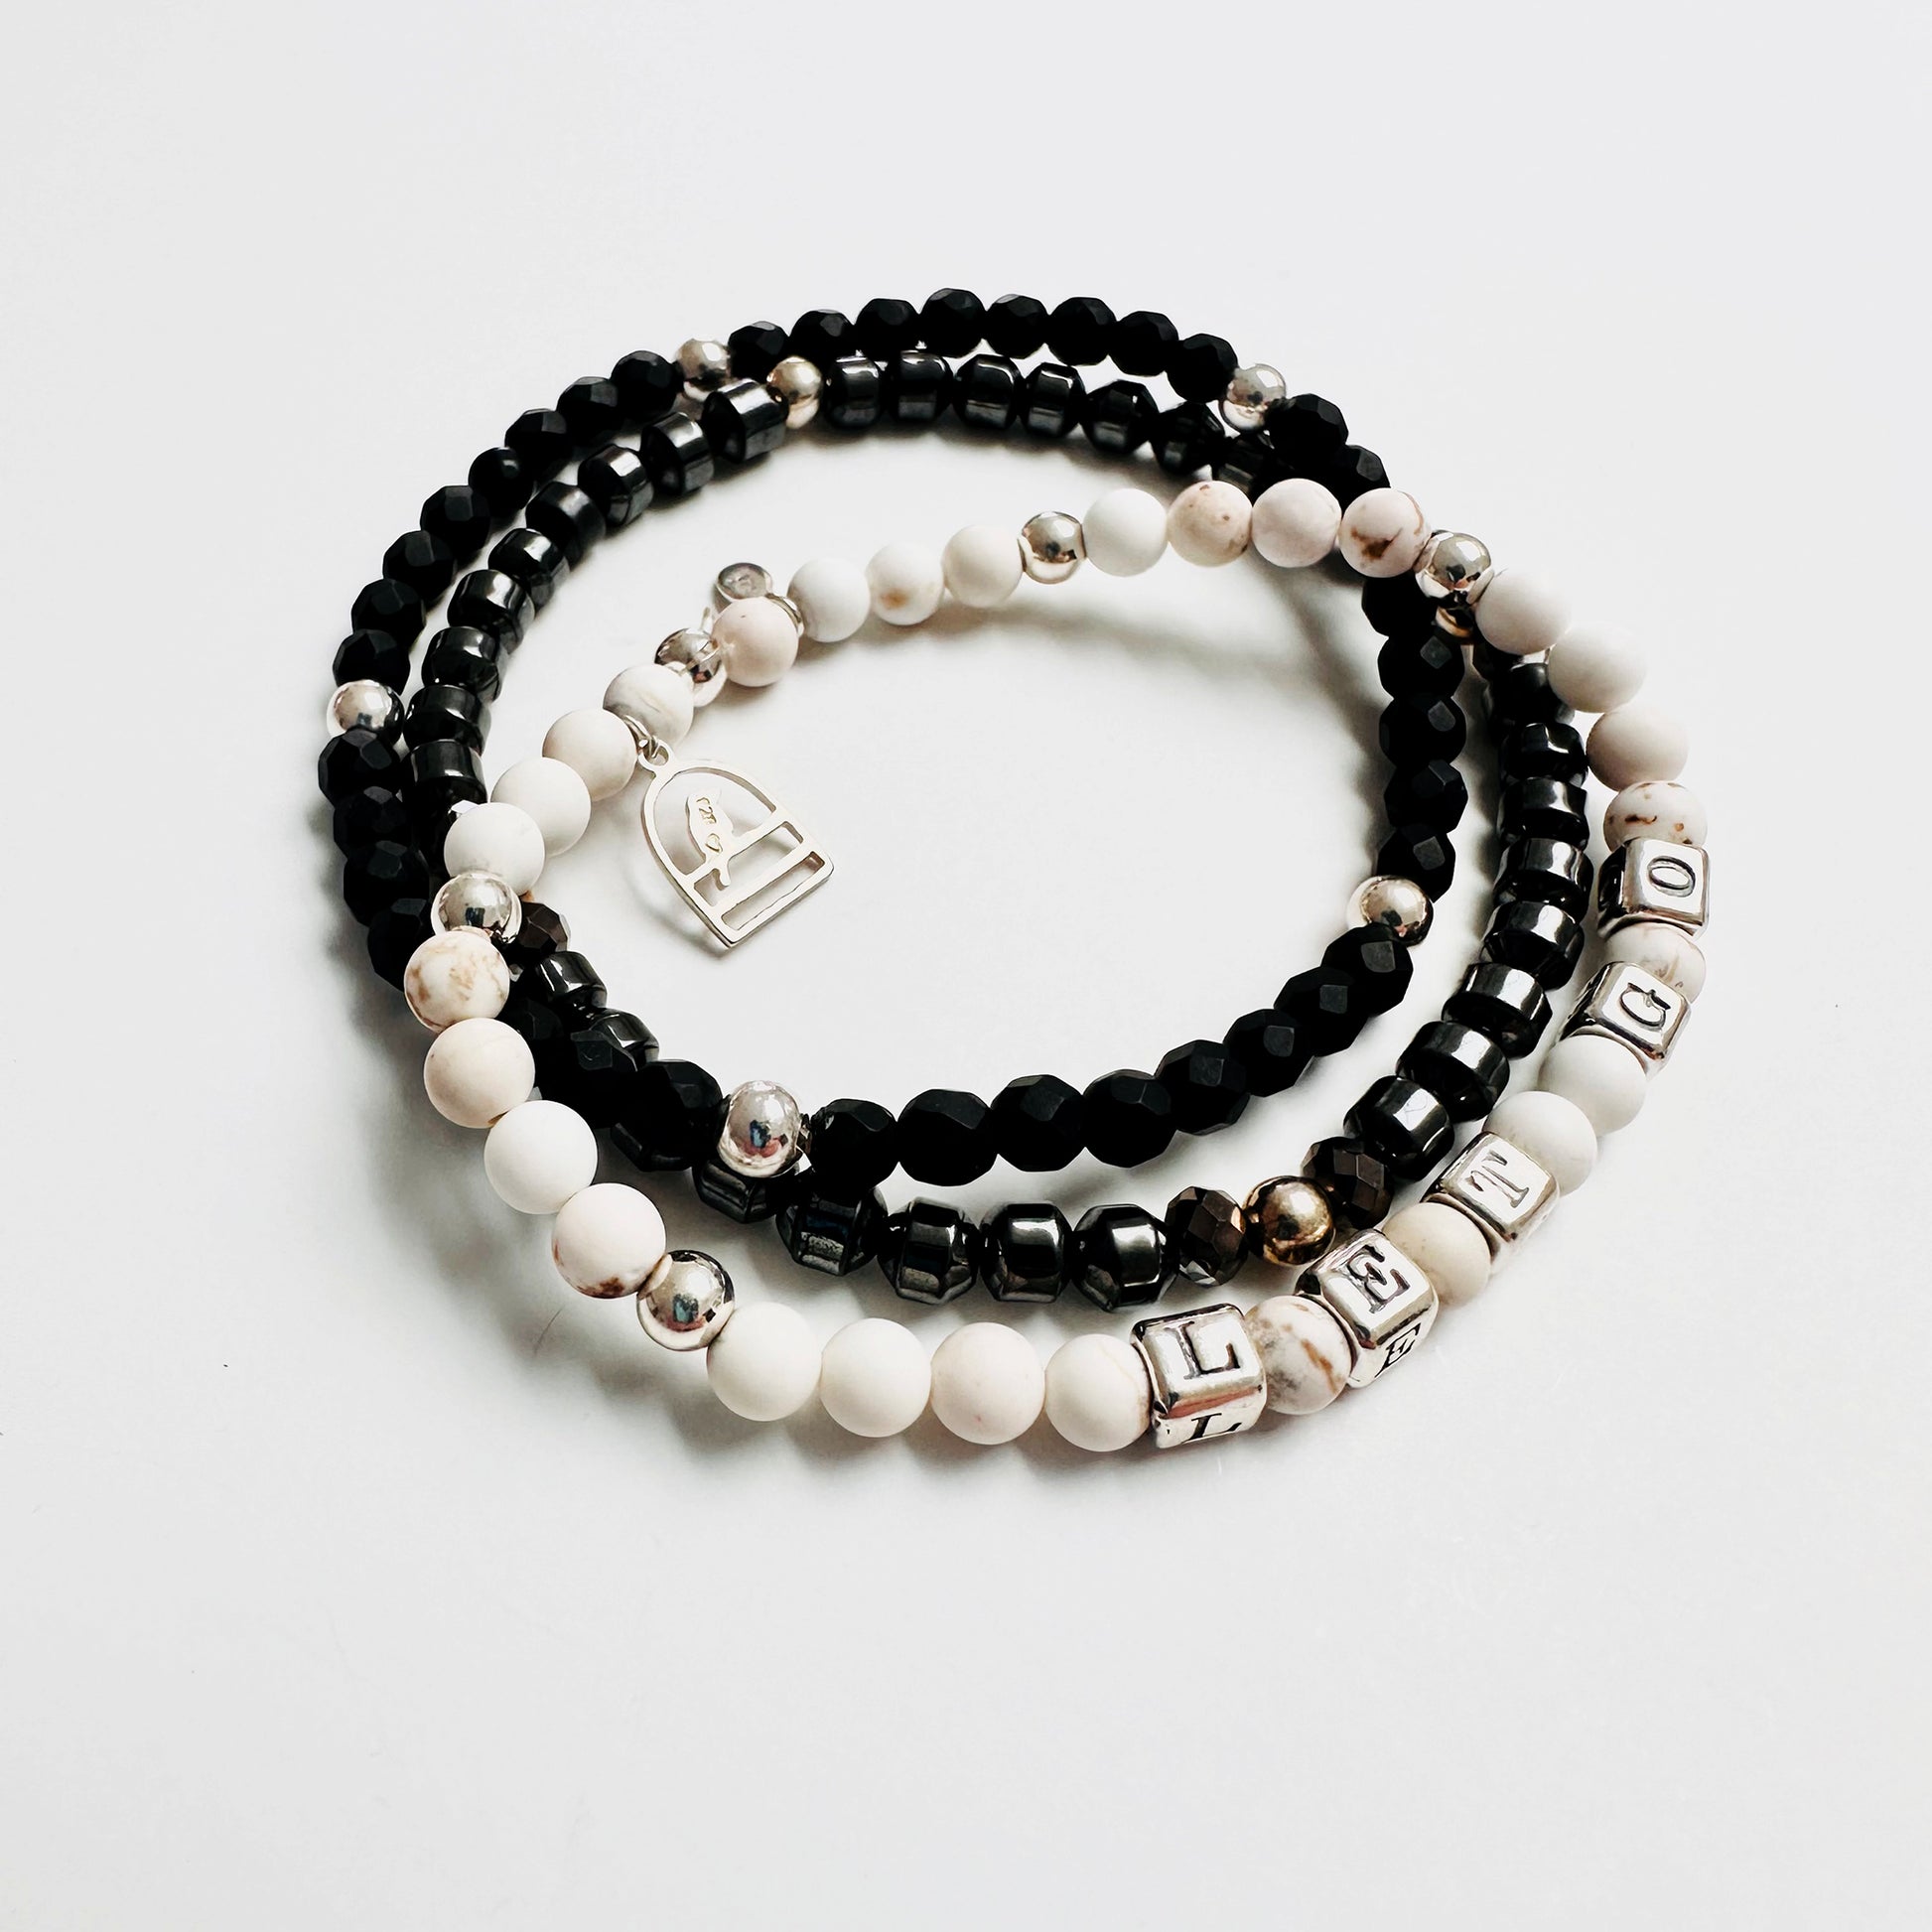 Let Go stretch bracelet in sterling silver and white howlite beads, with sterling silver bird charm and black only and hematite stretch bracelets